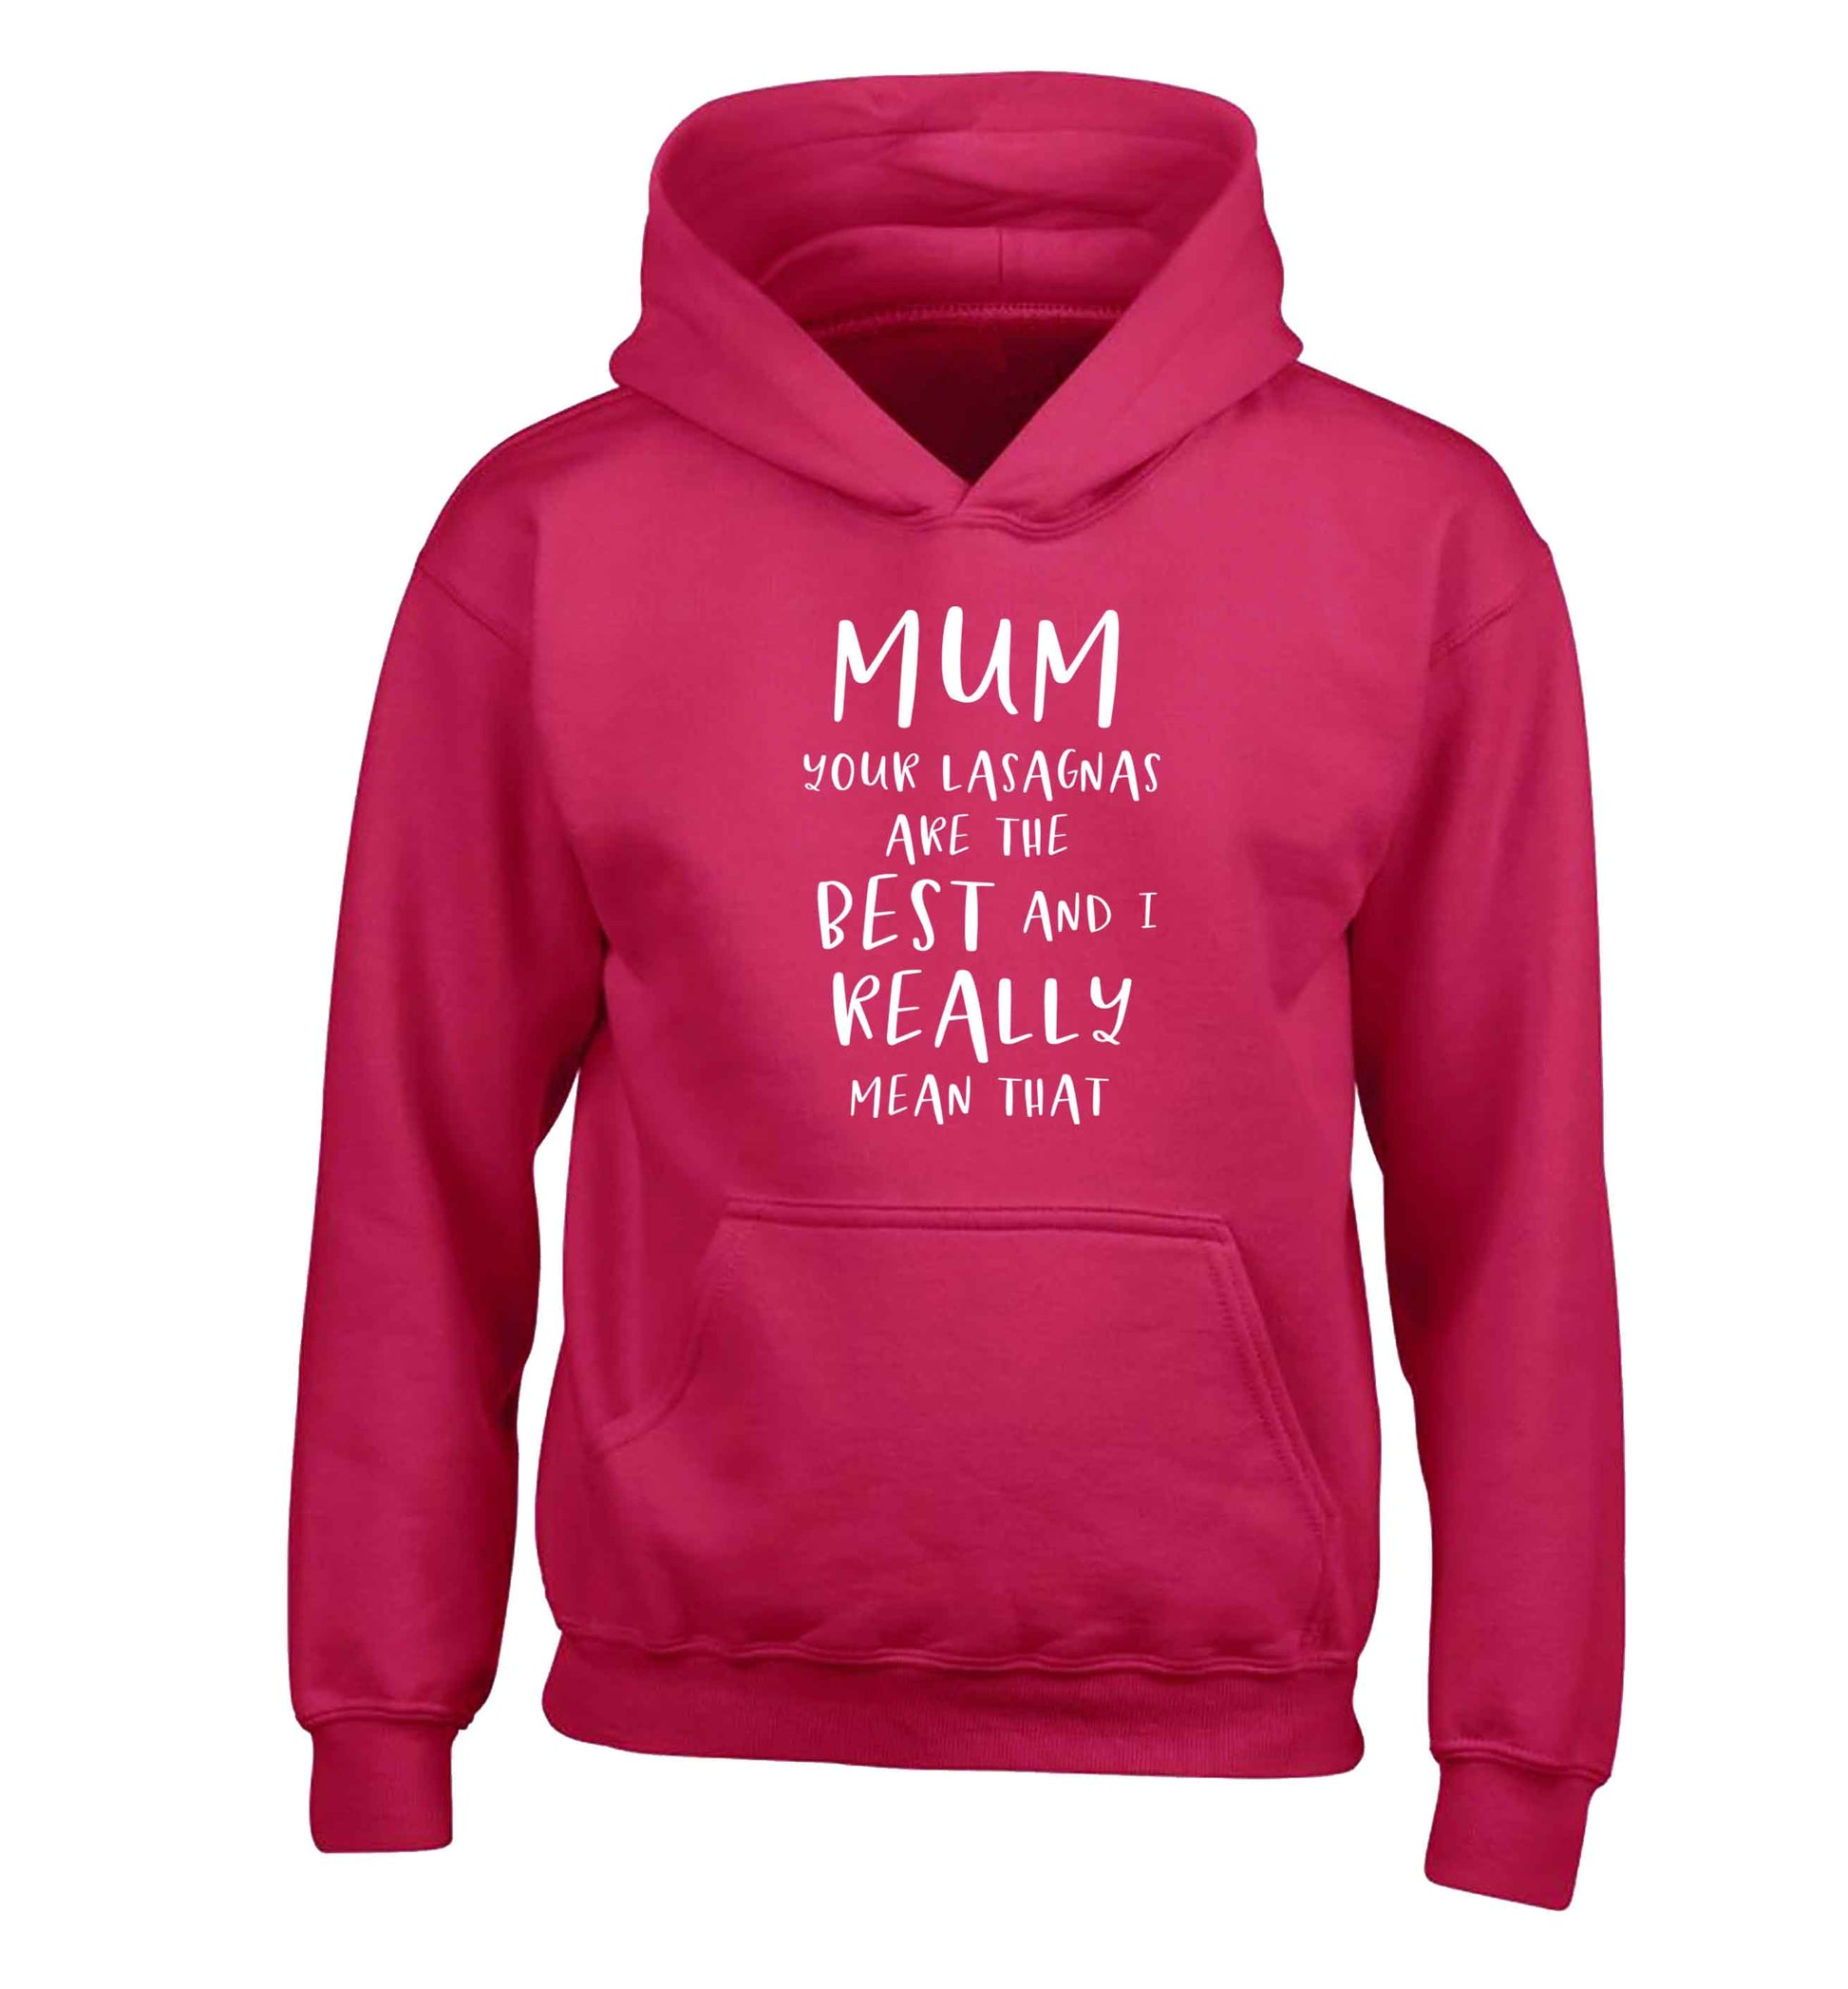 Funny gifts for your mum on mother's dayor her birthday! Mum your lasagnas are the best and I really mean that children's pink hoodie 12-13 Years